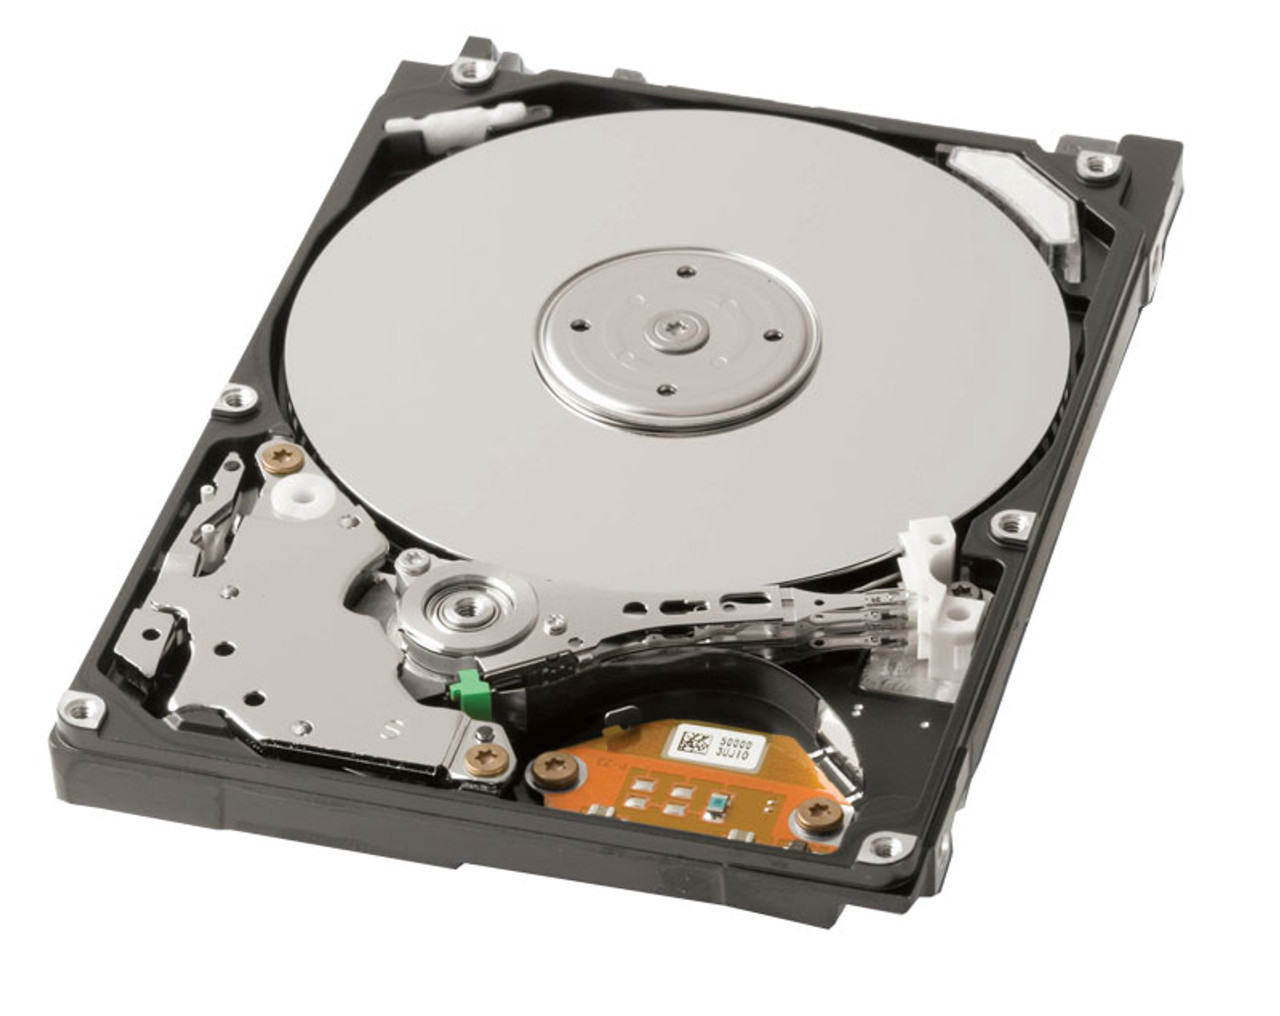 4X326 Dell 73GB 15000RPM Ultra-320 SCSI 80-Pin Hot Swap 8MB Cache 3.5-inch Internal Hard Drive with Tray